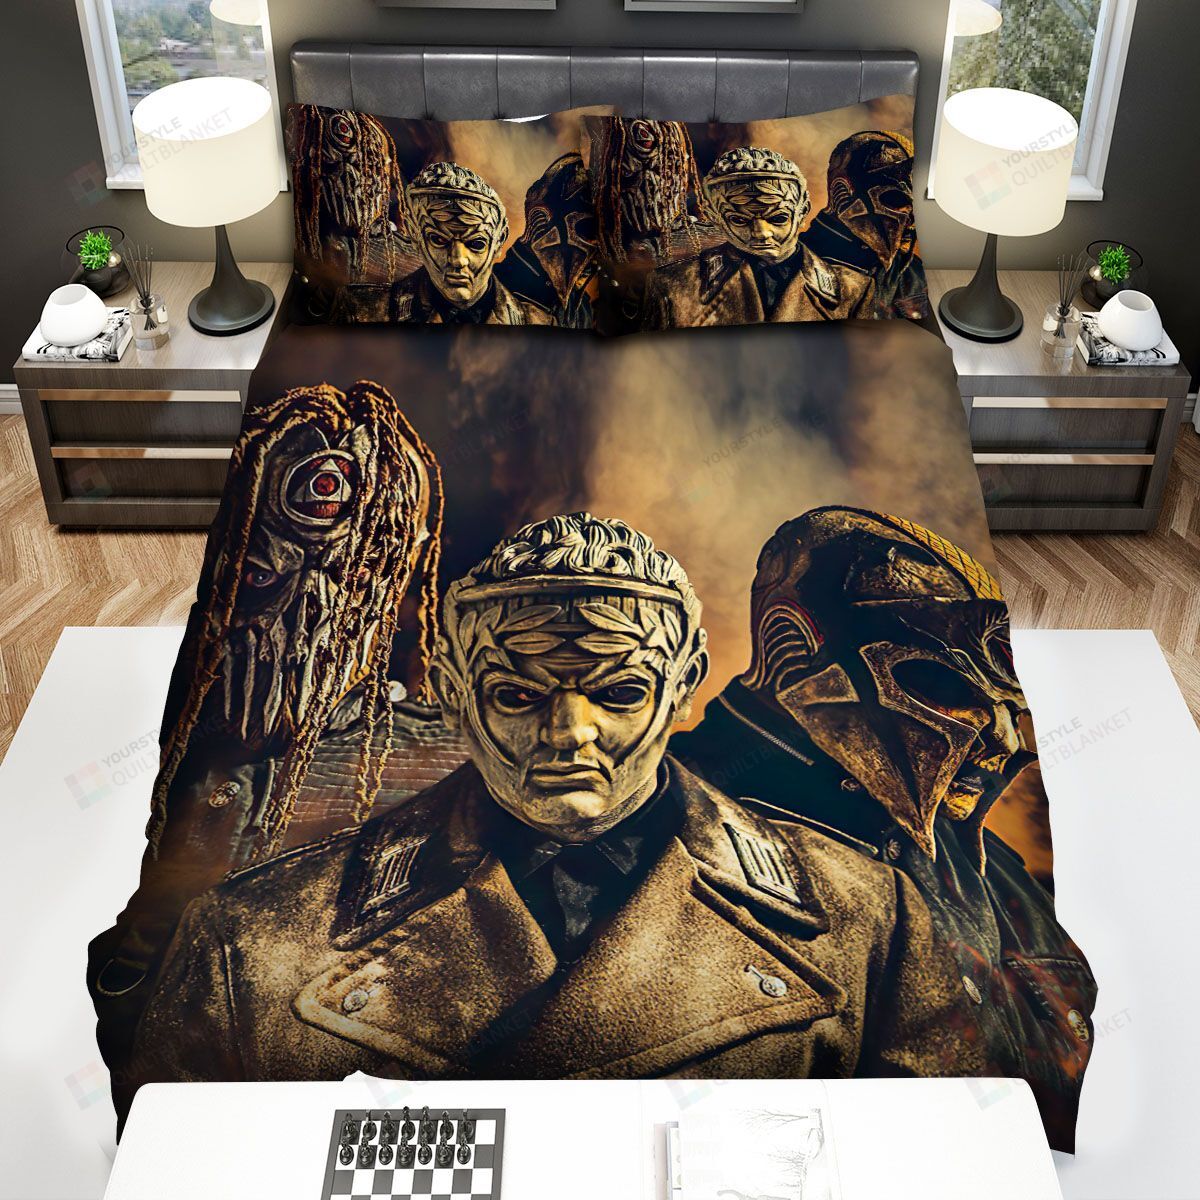 Mushroomhead Band A Wonderful Life Album Cover Bed Sheets Spread Comforter Duvet Cover Bedding Sets